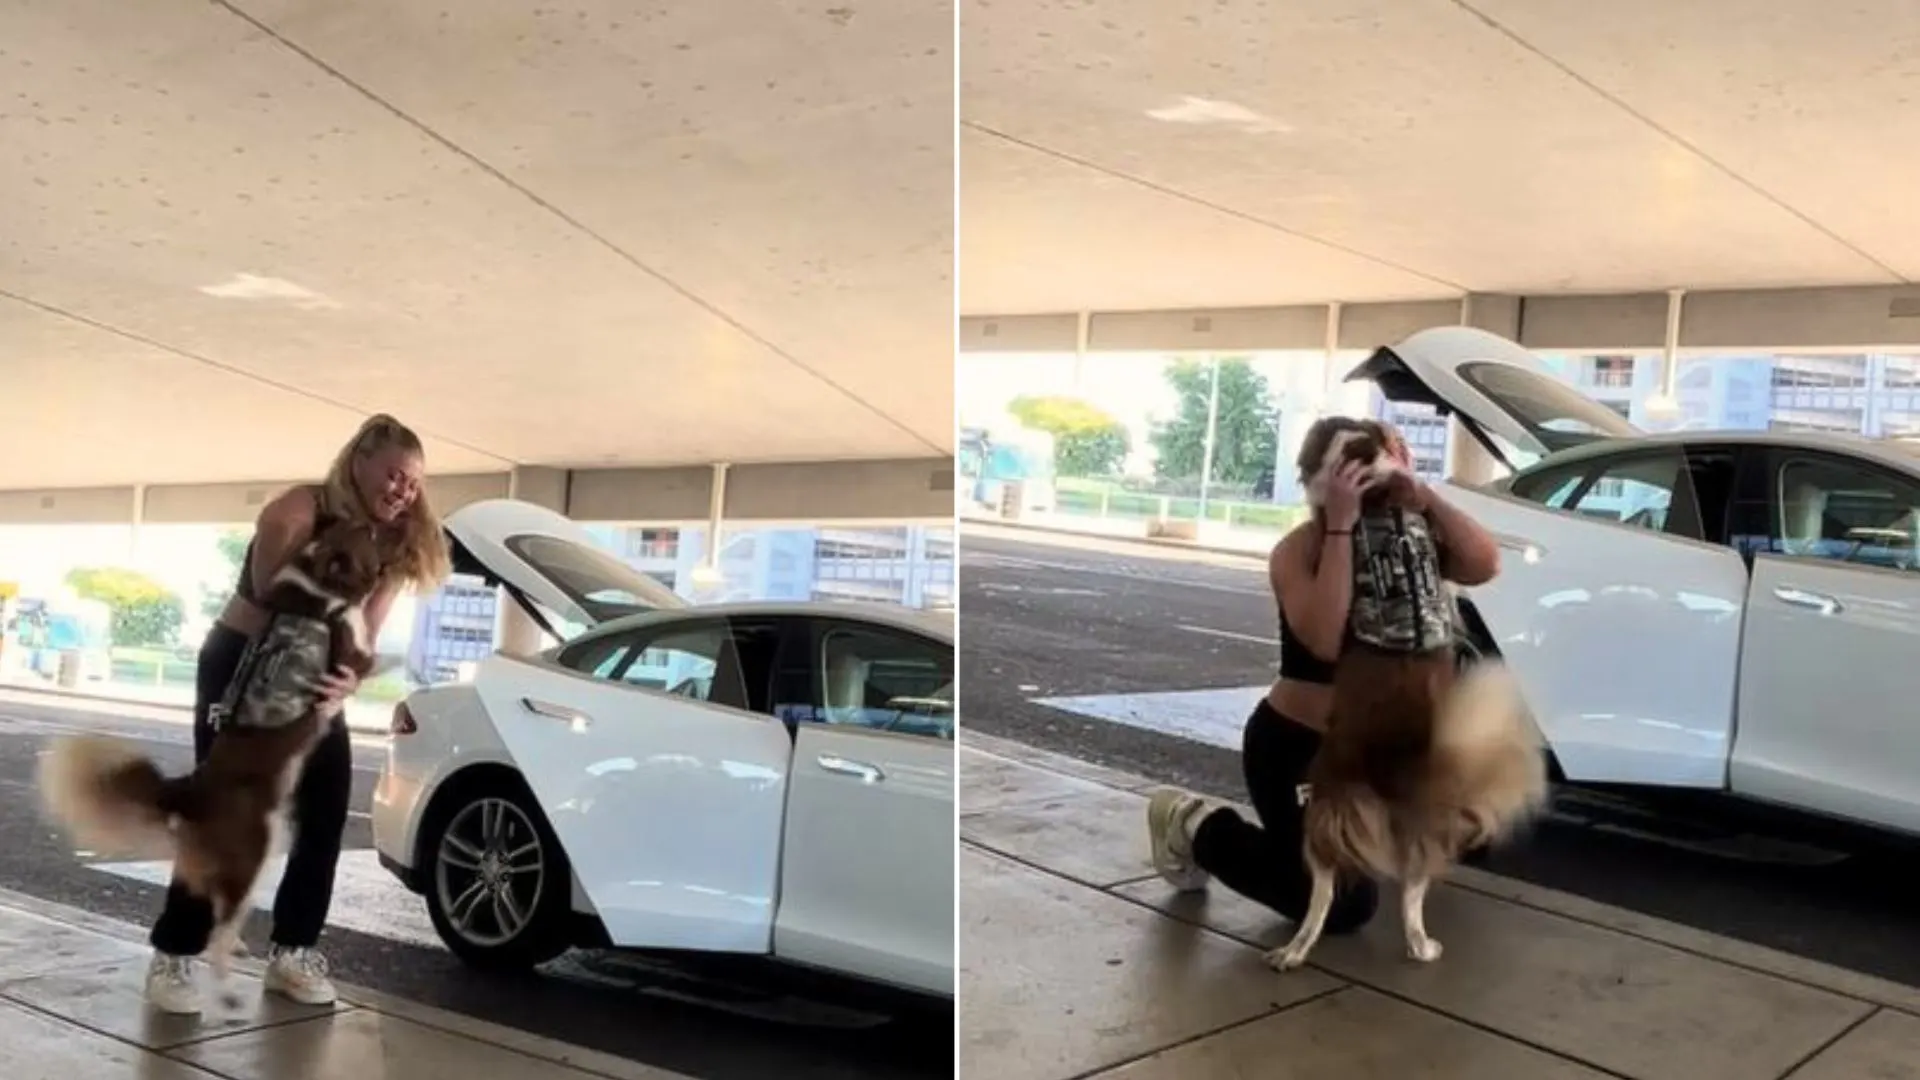 After 202 Days Of Being Separated, The Dog Is Thrilled To Finally Reunite With His Owner